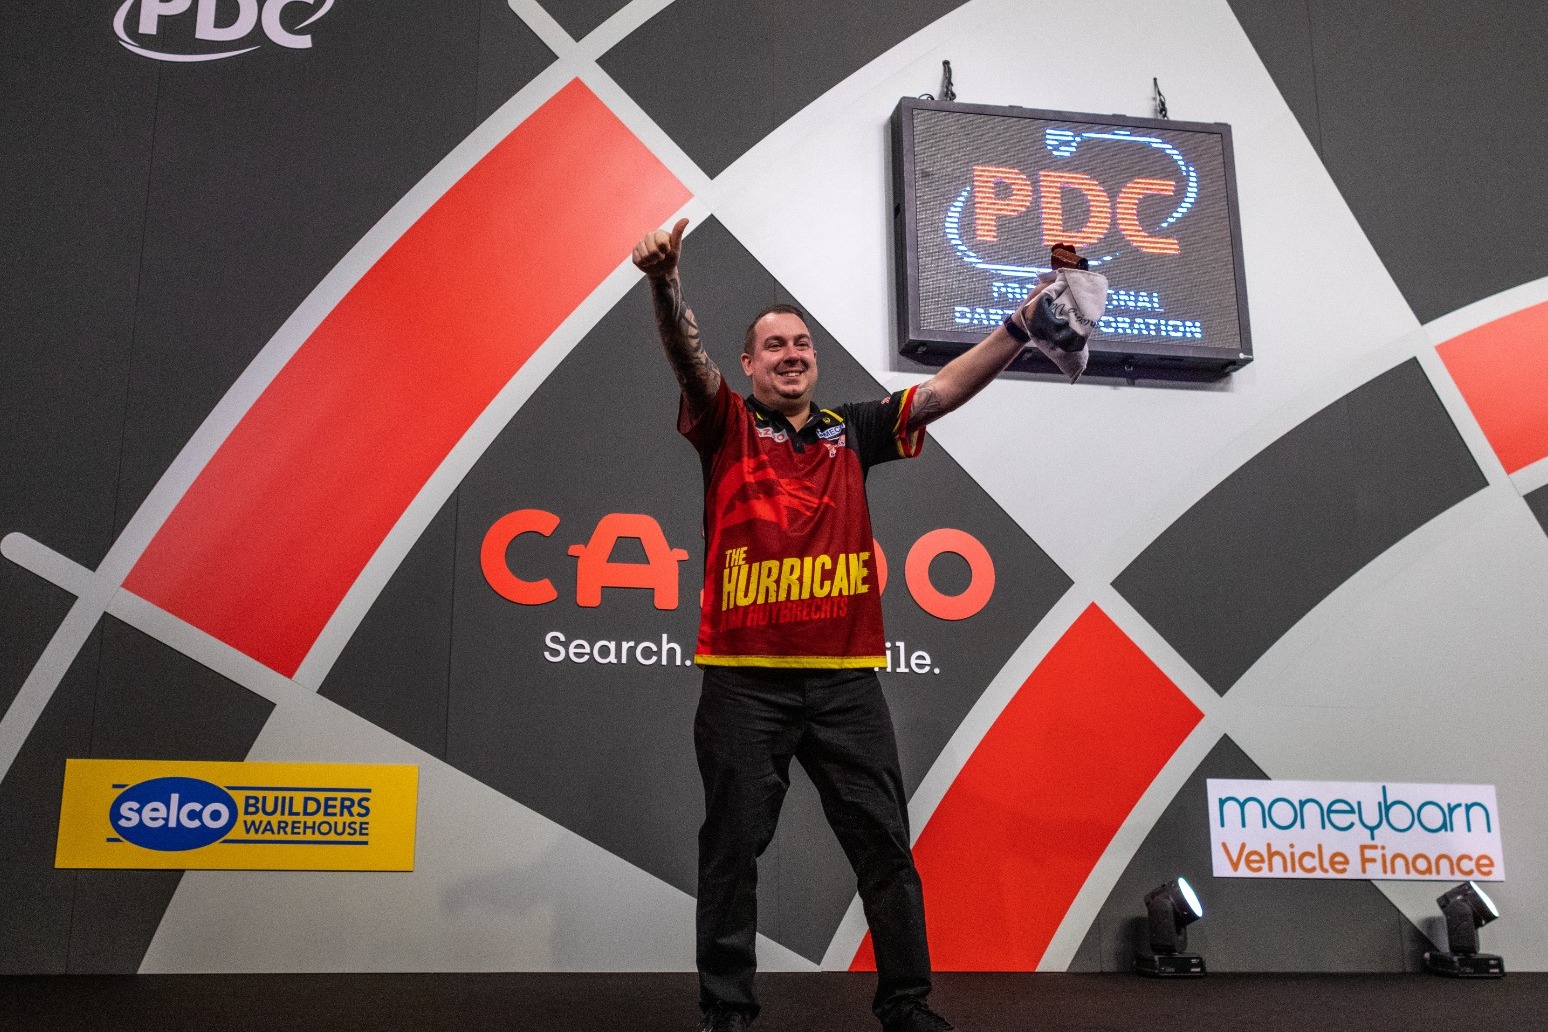 Reigning PDC world champion Peter Wright knocked out by Kim Huybrechts 